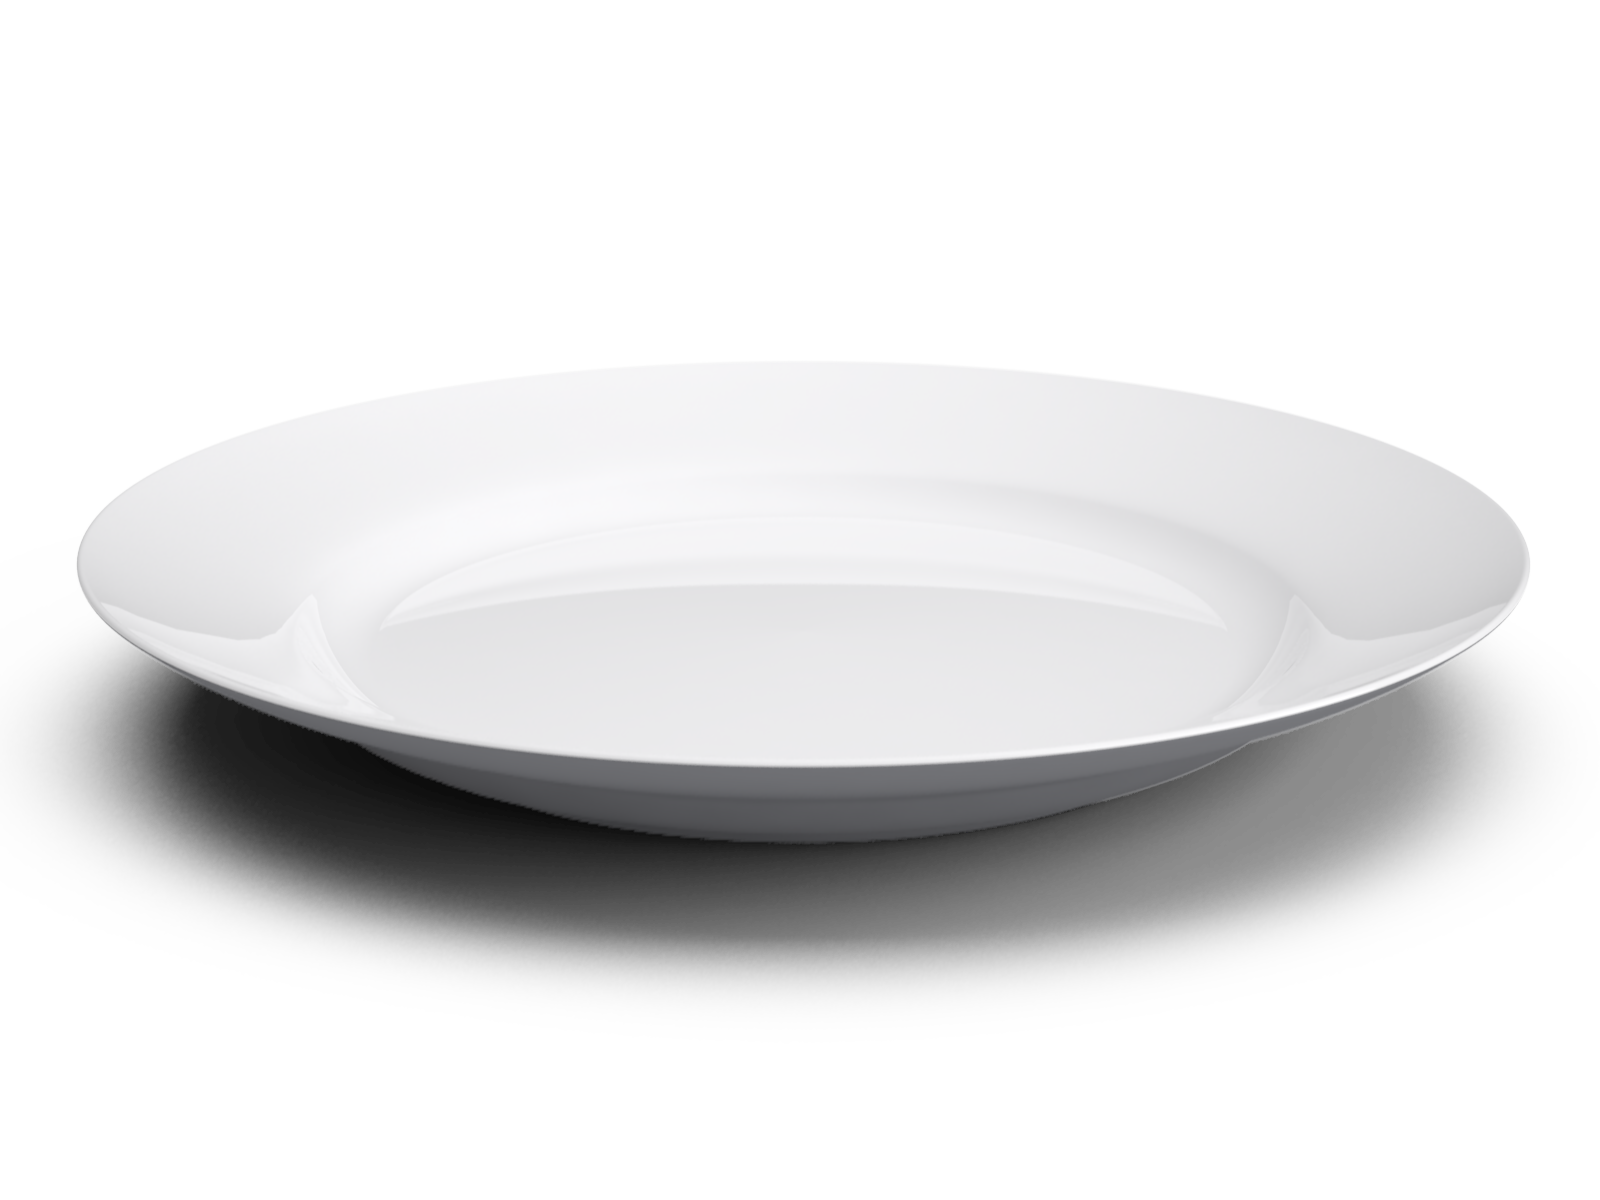 Plates Png Png Image - Plate, Transparent background PNG HD thumbnail